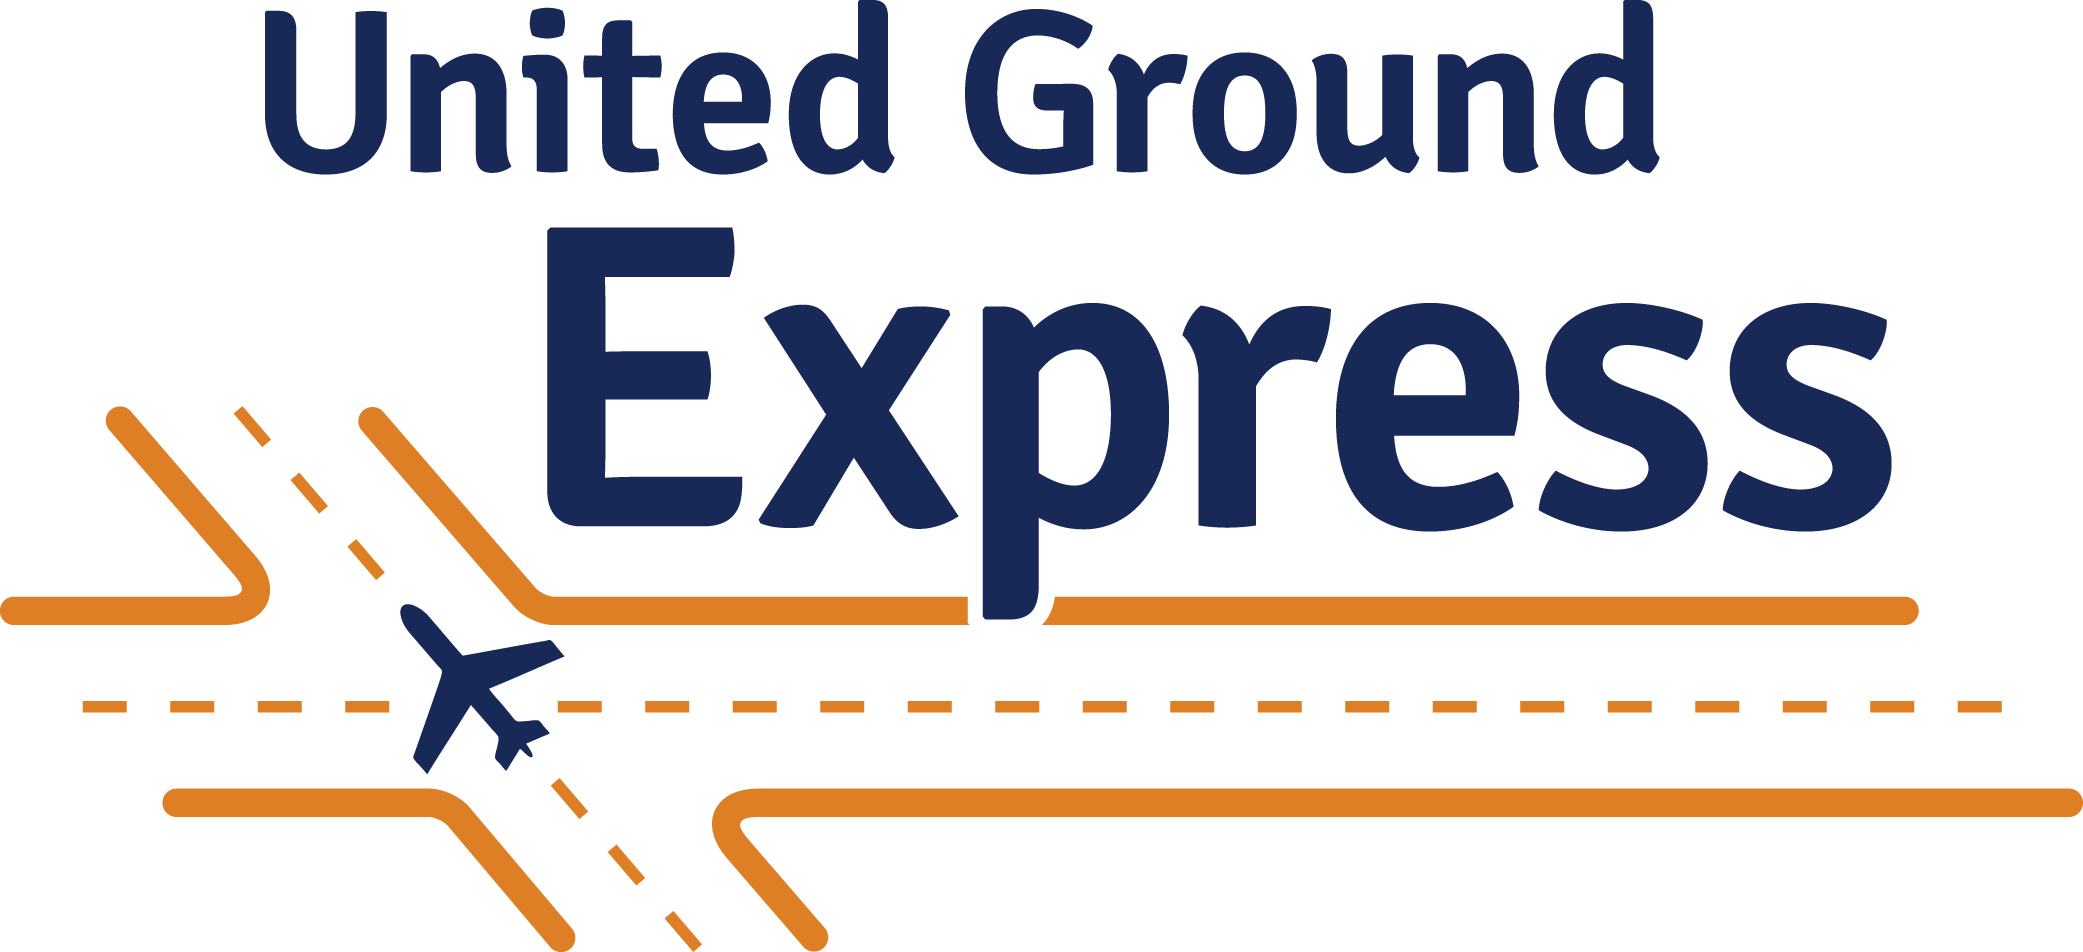 United Ground Express (A subsidiary of United Airlines, Inc.)